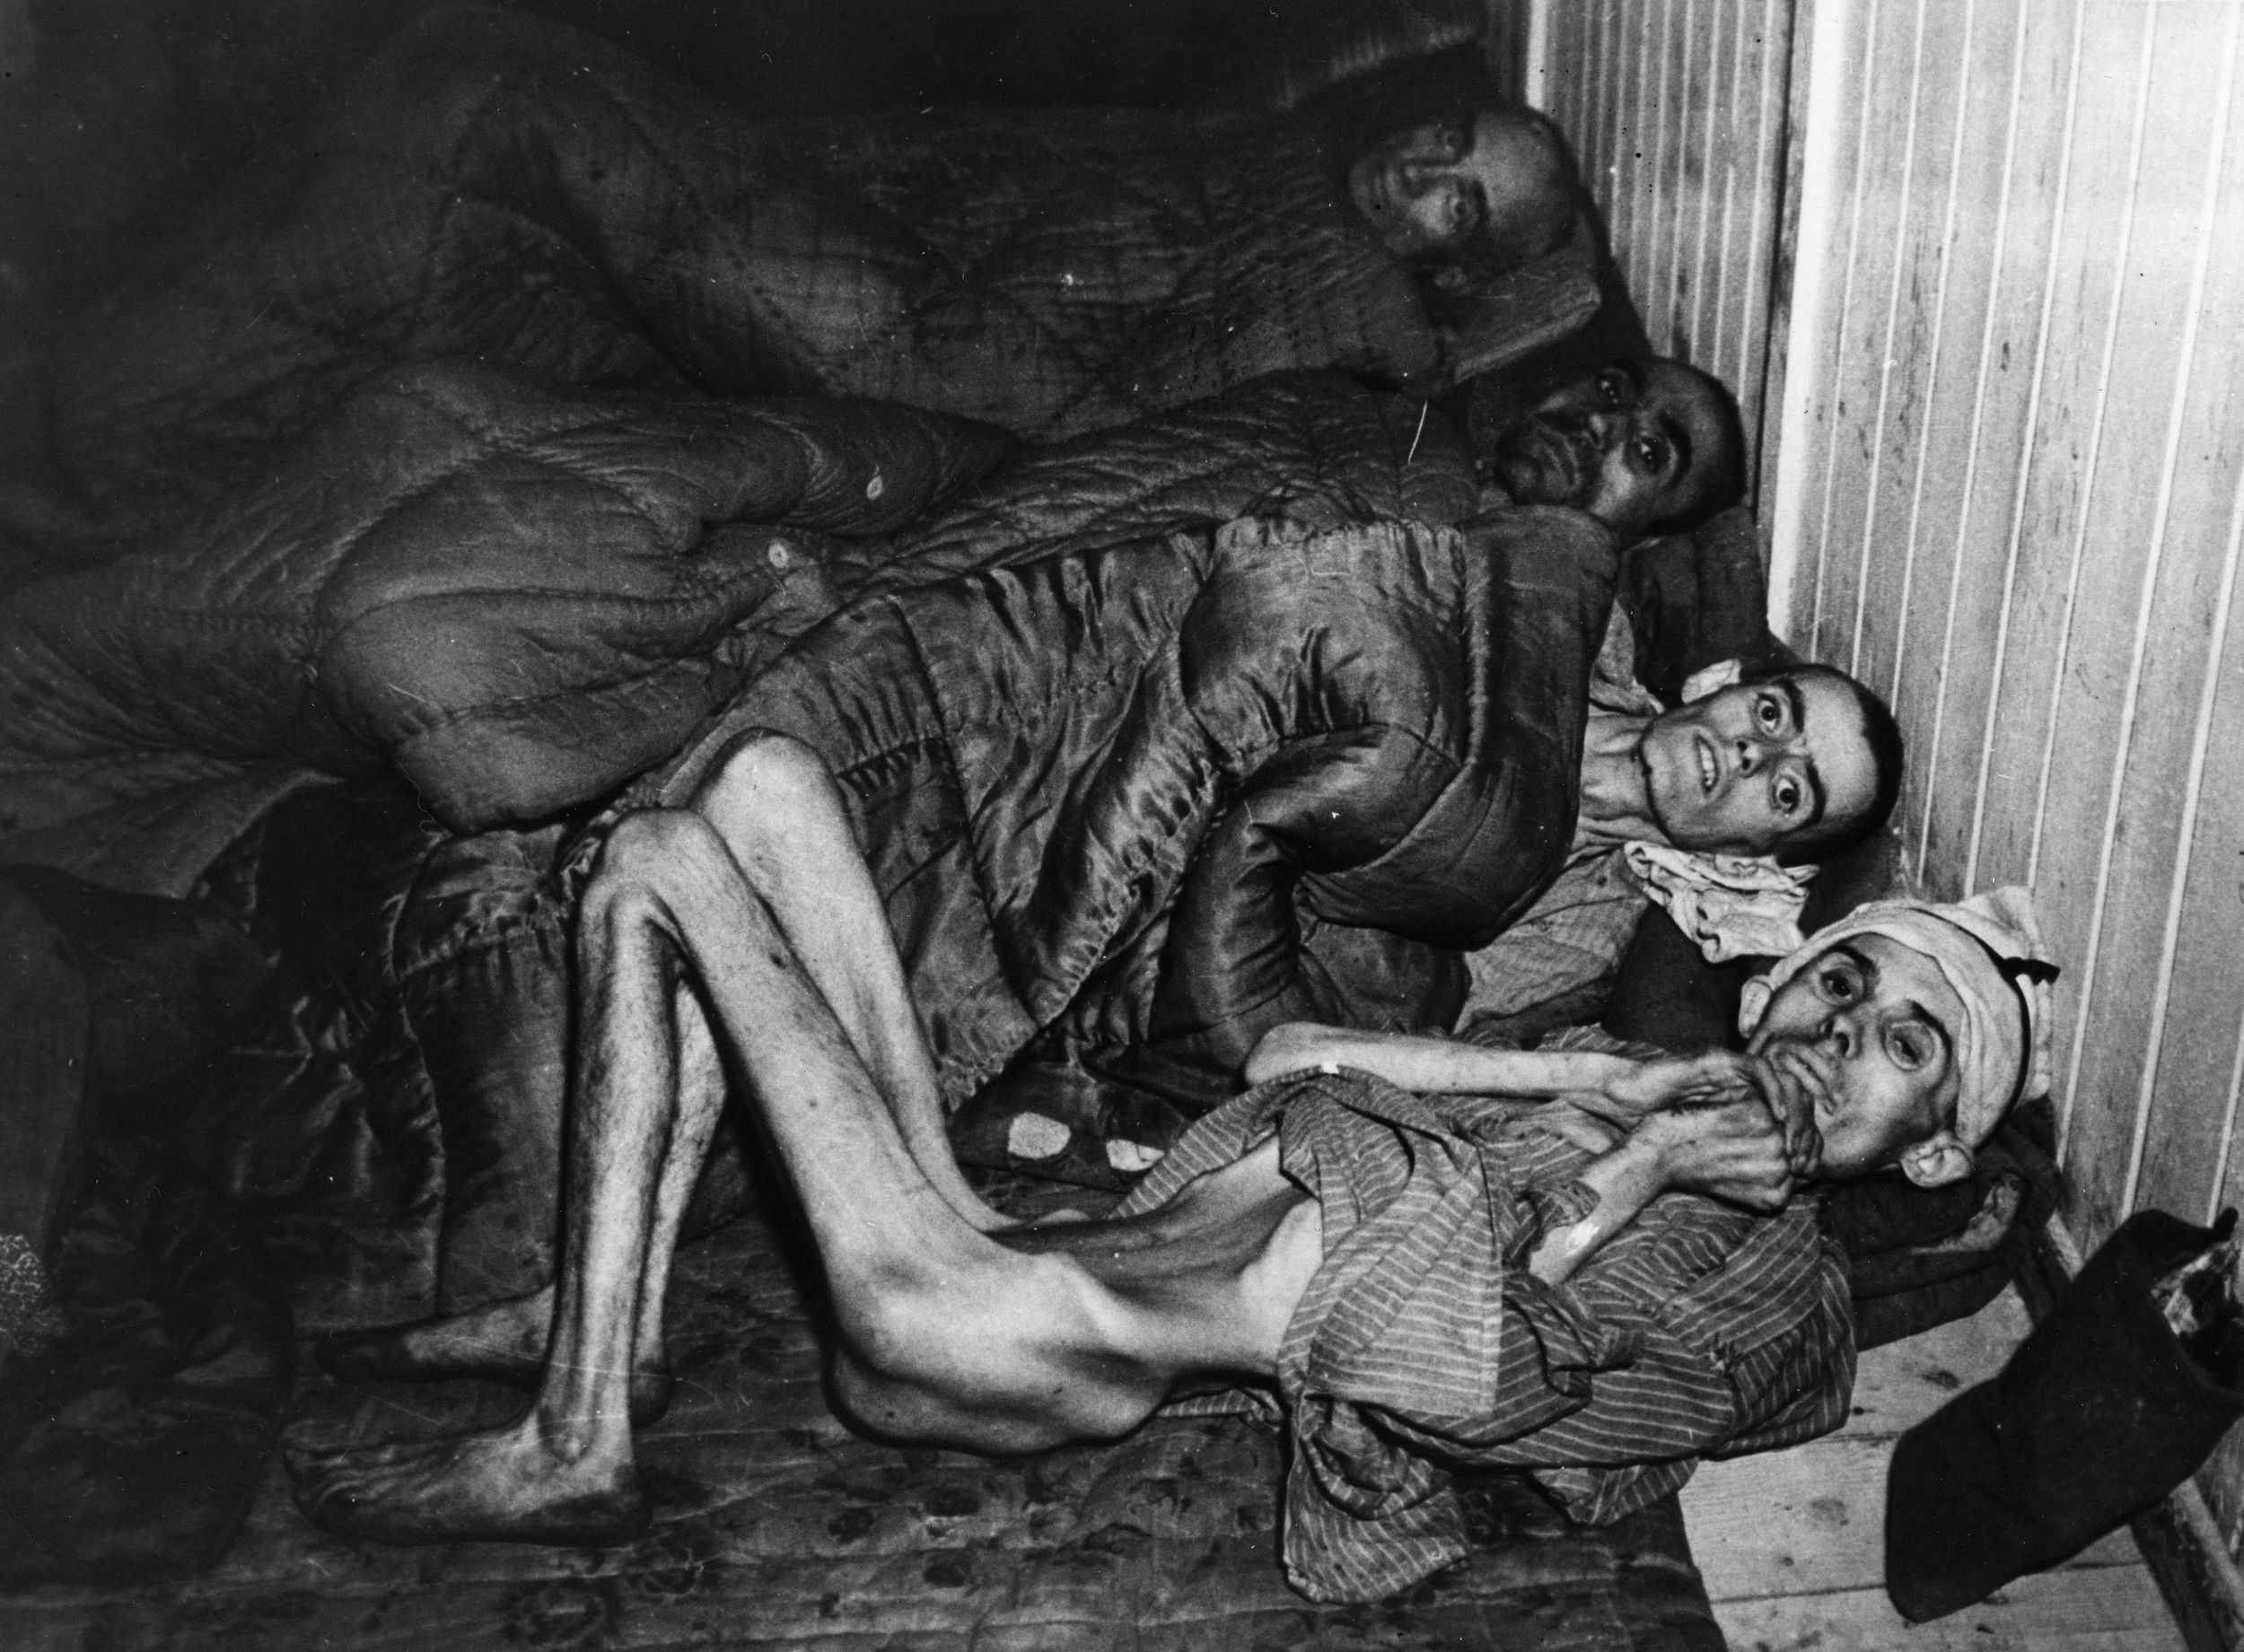 The emaciated condition of the inmates liberated at Buchenwald shocked American soldiers. This Hungarian Jew was starved to such an extent that his backbone is visible from the front of his body.